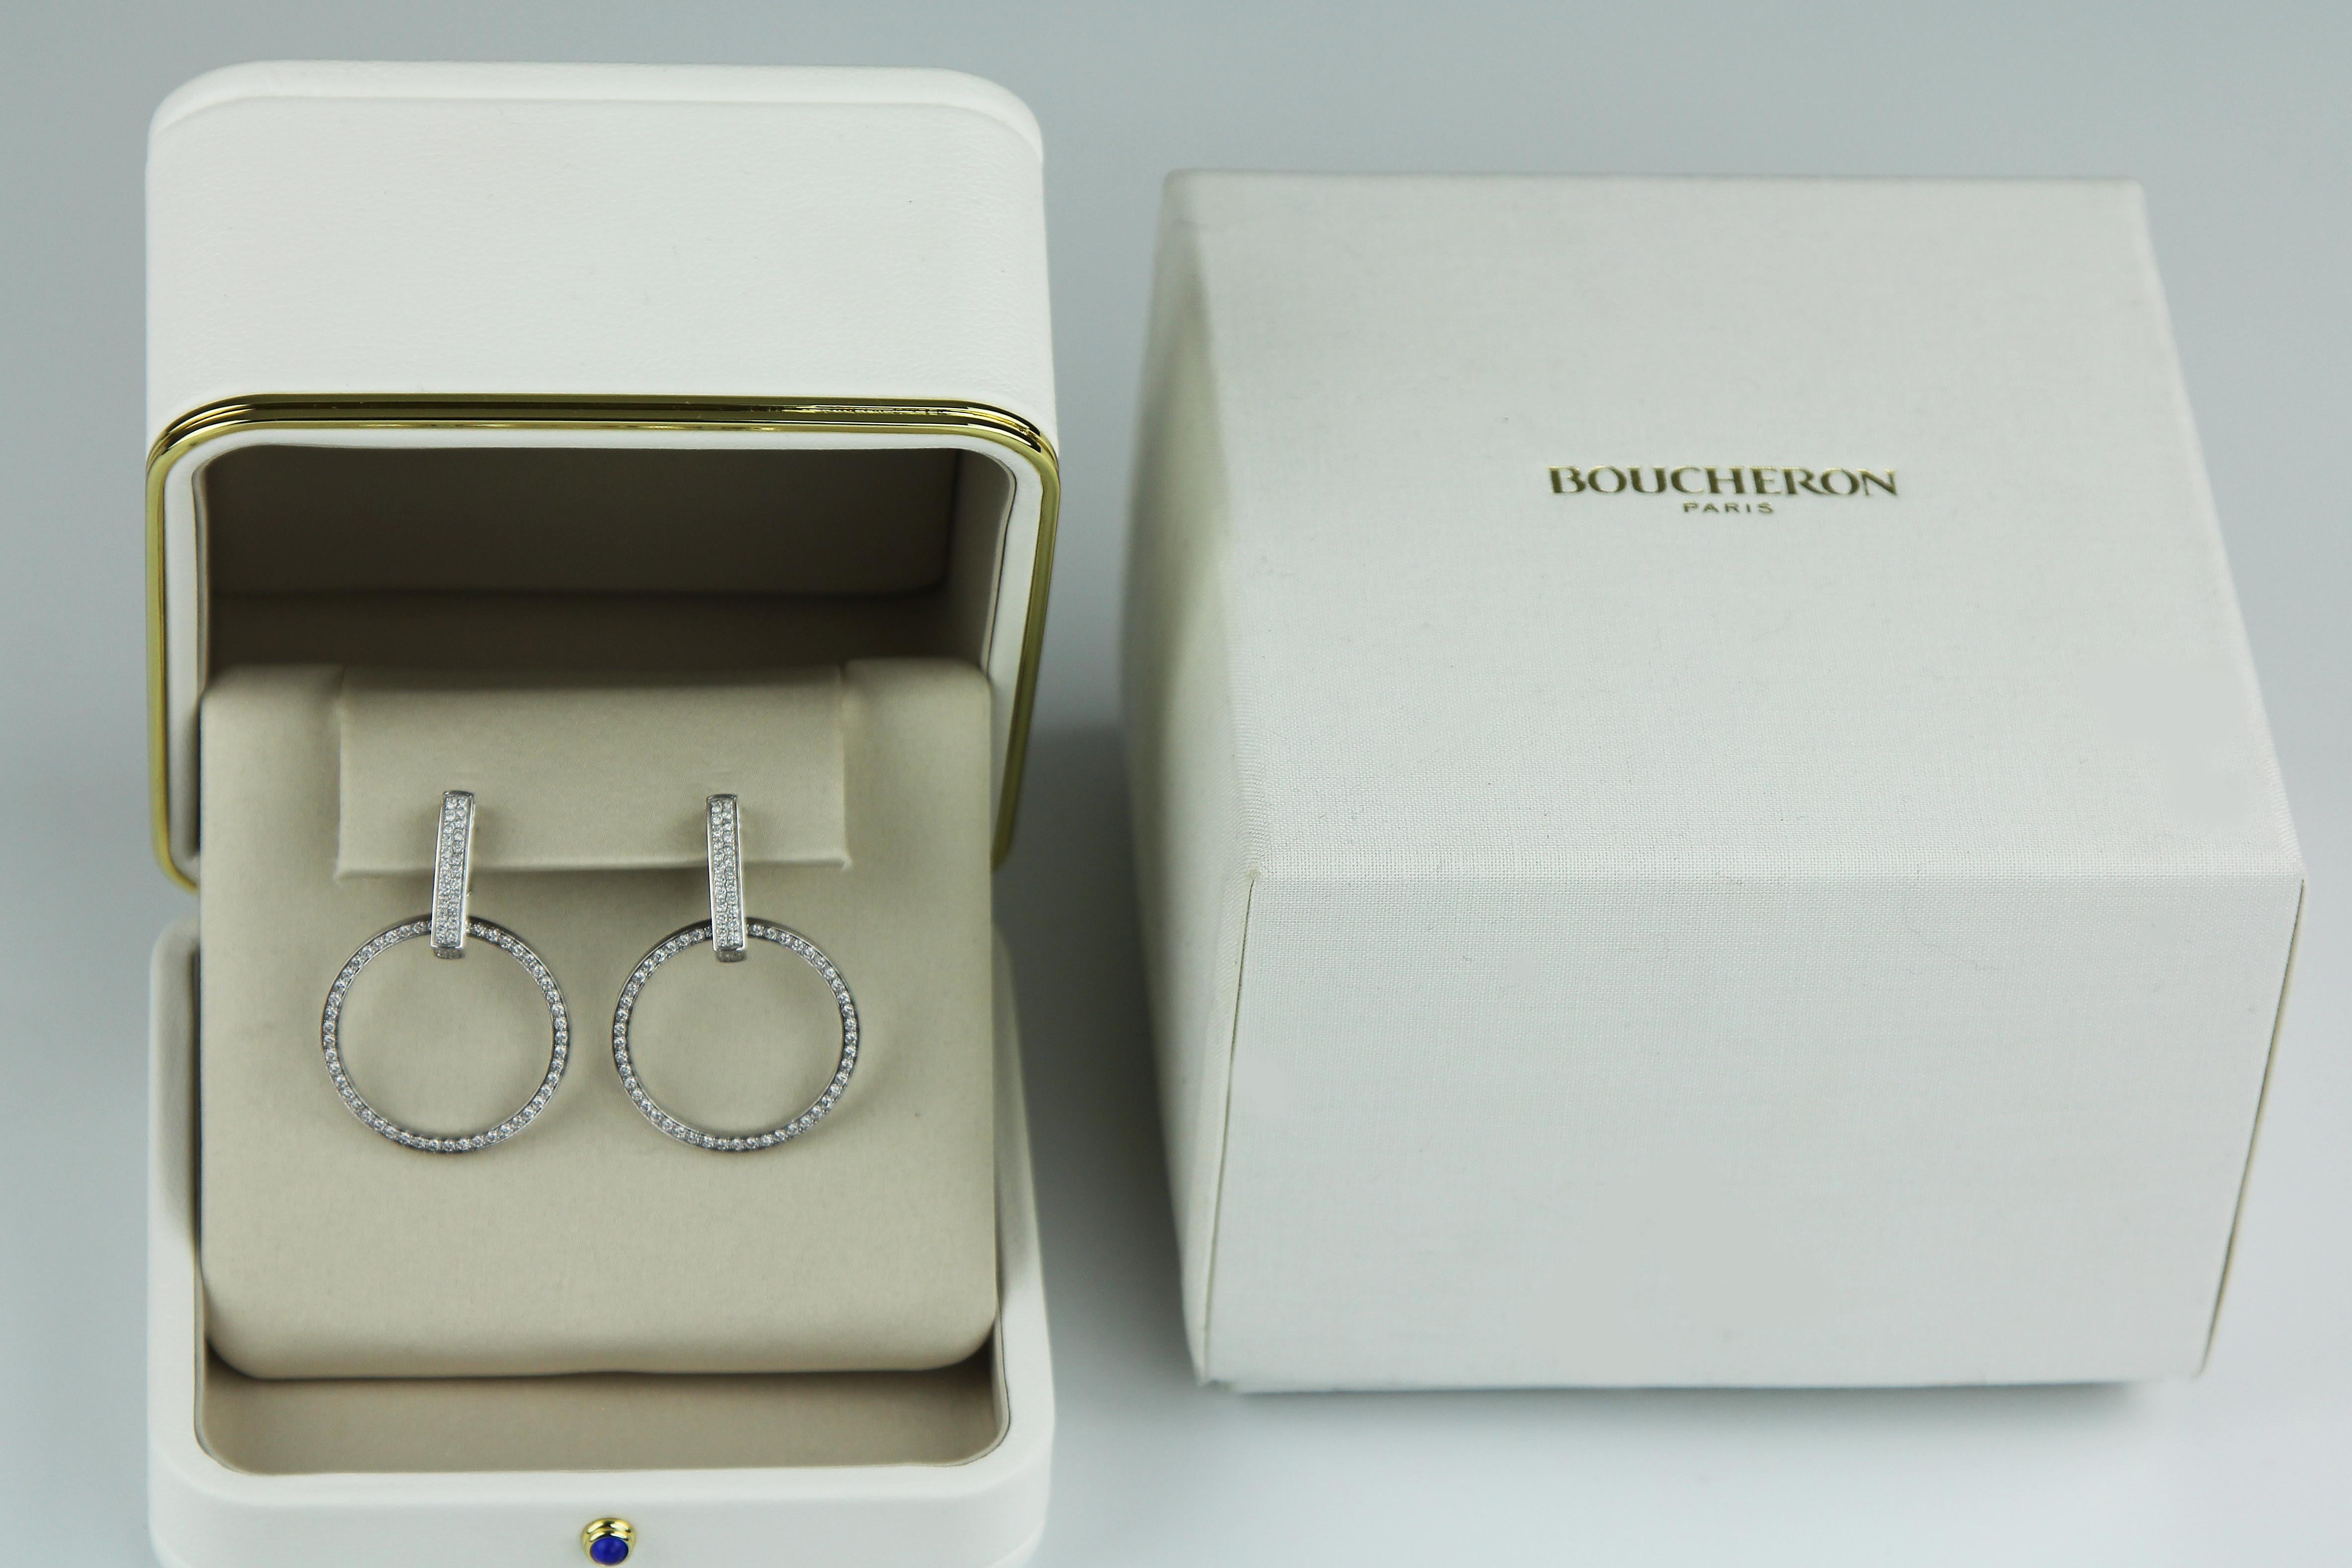 Boucheron diamond pairs of earrings in 18 ct white gold original box . These earrings are at the height of jewellery sophistication and refinement due to the way the hoop-bedazzled in diamonds, is carefree and able to move separately yet still fully